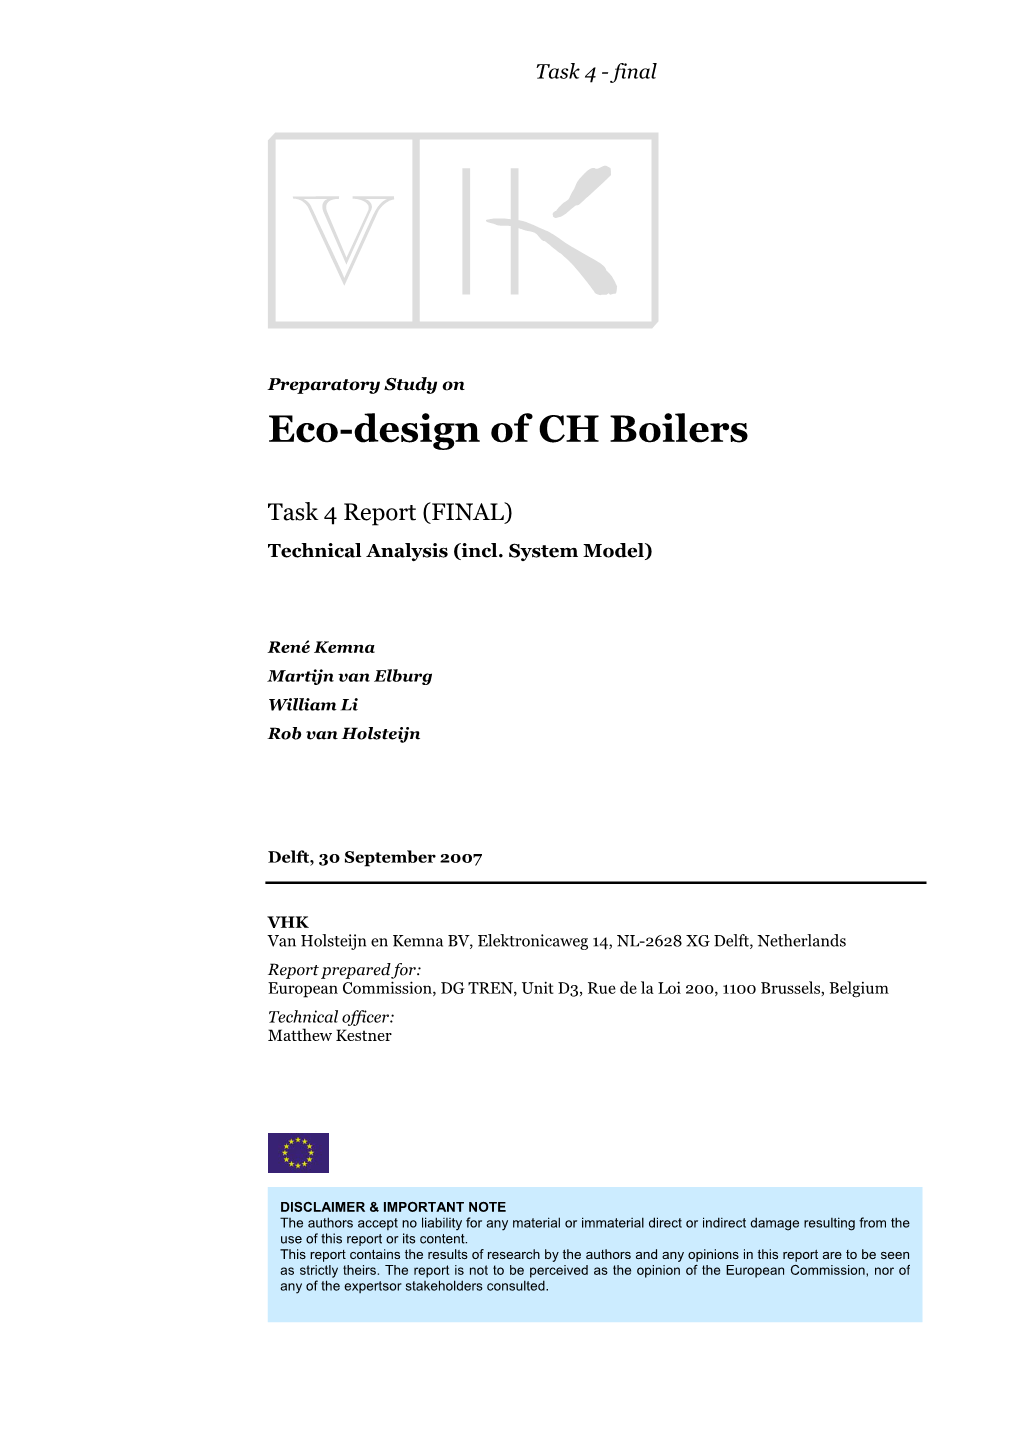 Eco-Design of CH Boilers